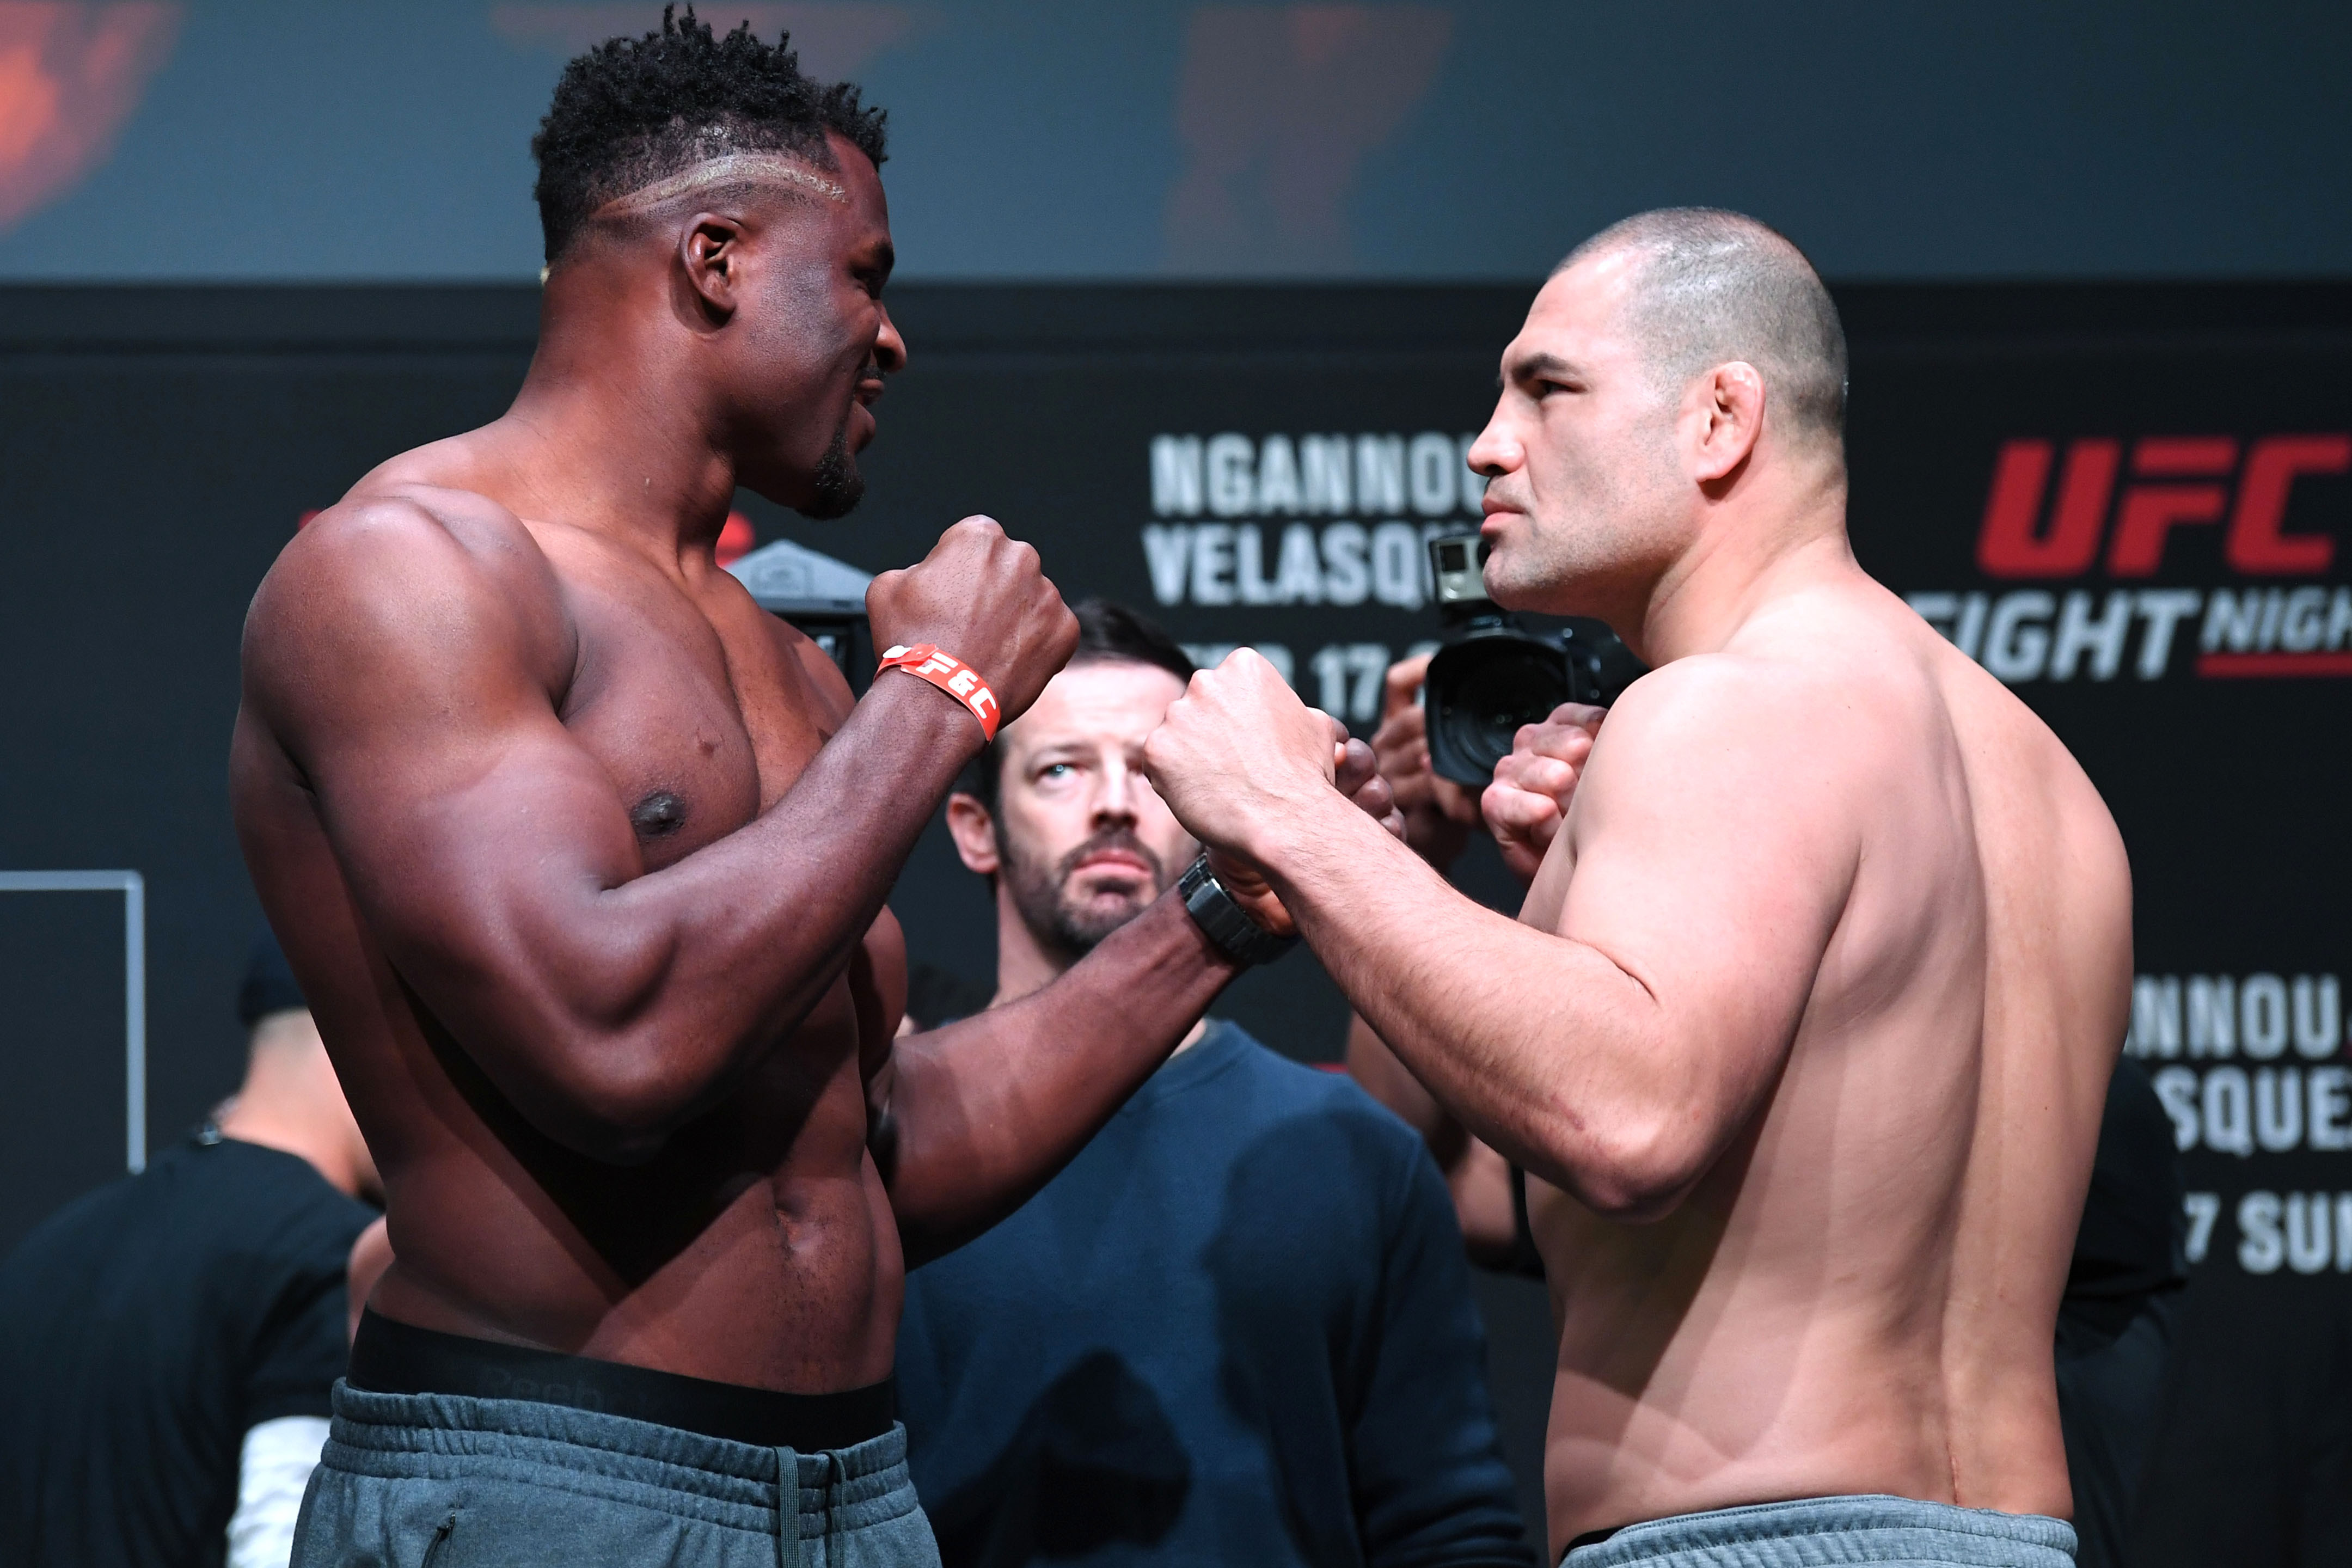 Cain Velasquez will prevail after averting Francis Ngannou knockout